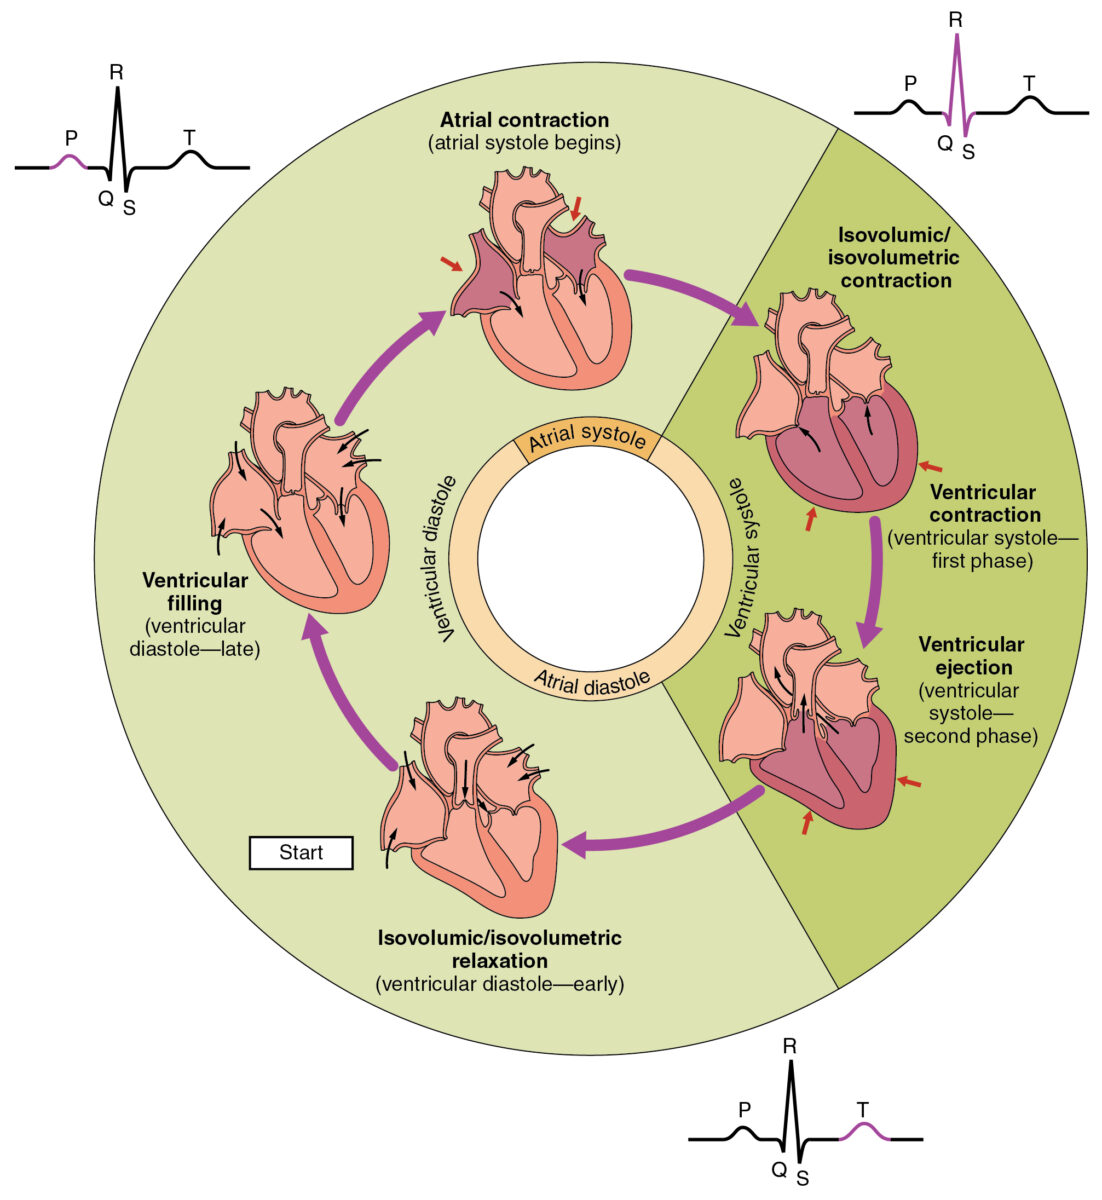 The phases of the cardiac cycle